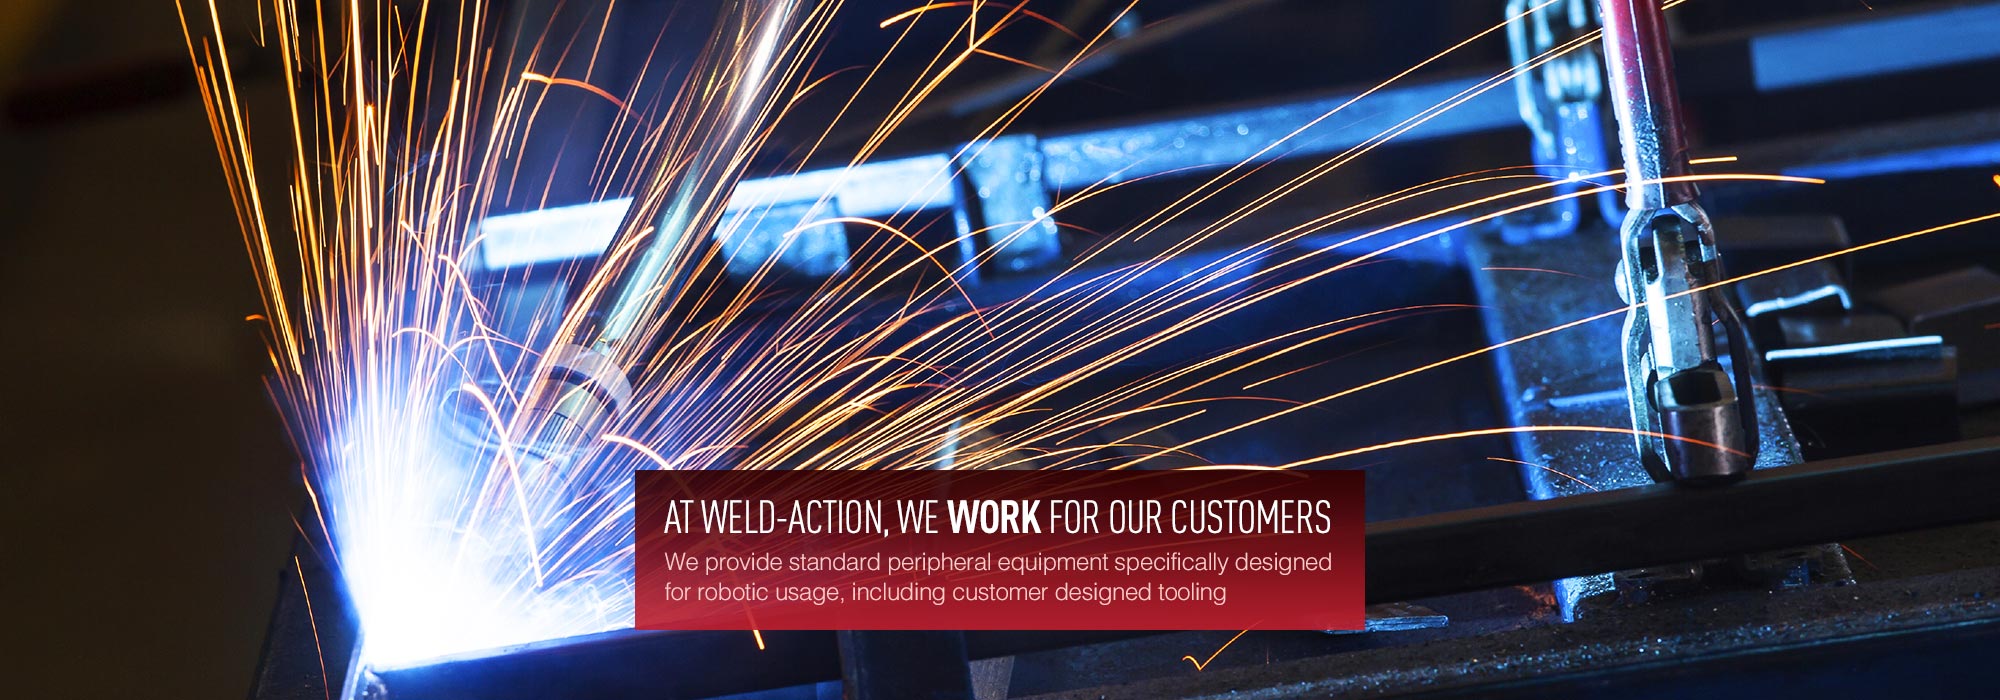 Weld-Action Co